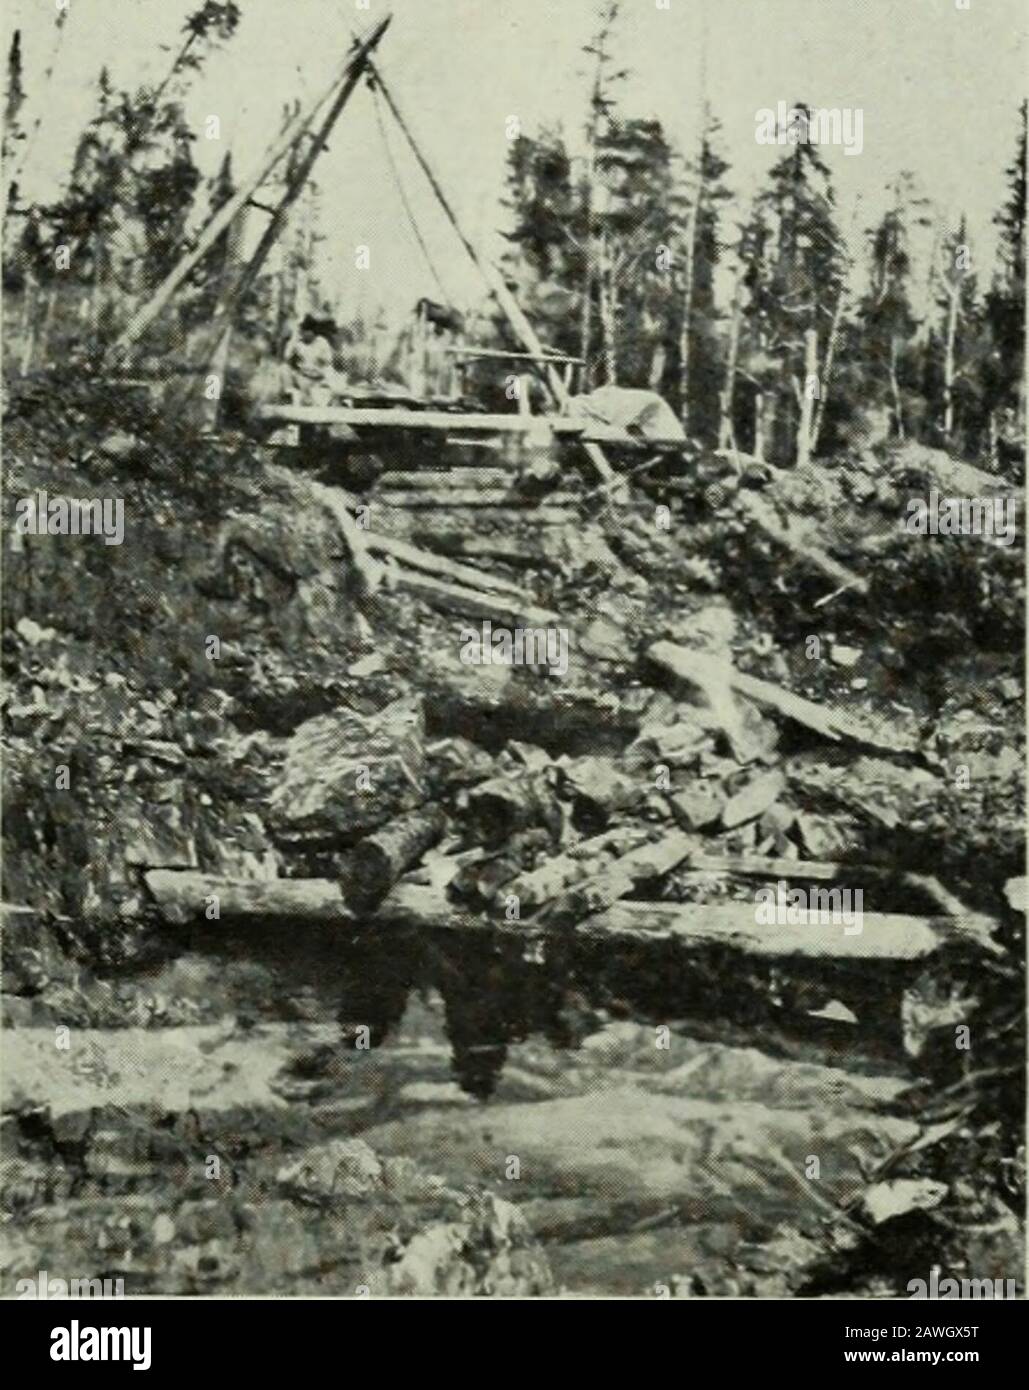 Annual report . ng considerable visible gold.The deposit appears to end. or pass into stringers, immediately east of the shaft. 1920 West Shiningtree Gold Area 49 but the vein can be traced intermittently to the west for about l.OUO feet, exceptwhere it is intruded by narrow dikes of diabase or felsite. The wall rocks are pillowlavas altered to hornblende, chlorite and carbonate schists. The deposit comprisesa quartz vein from one to three feet wide, with some stringers carrying gold onboth the hanging wall and fuotwall. Numerous showings of gold occur along thesurface of the vein for 100 feet Stock Photo